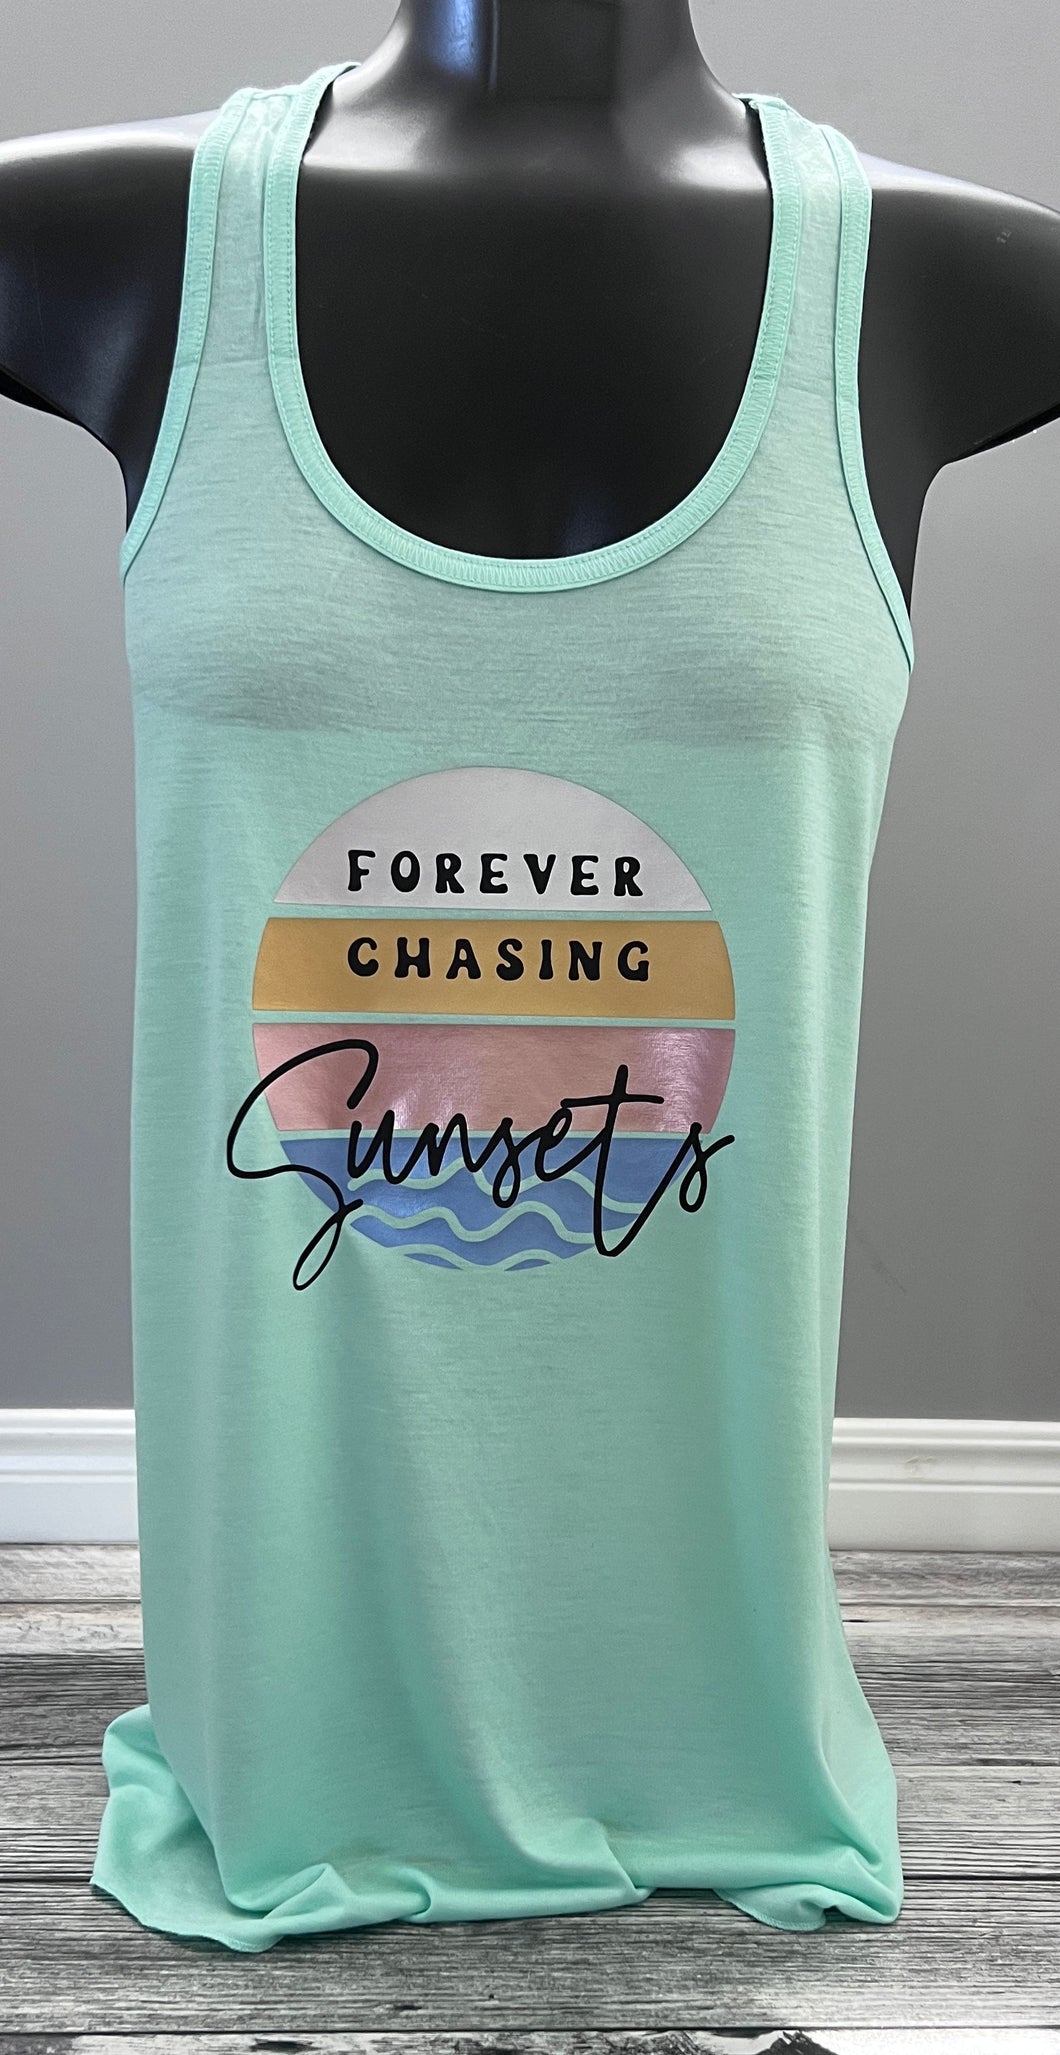 Forever chasing sunsets - Ladies Flowy Tank